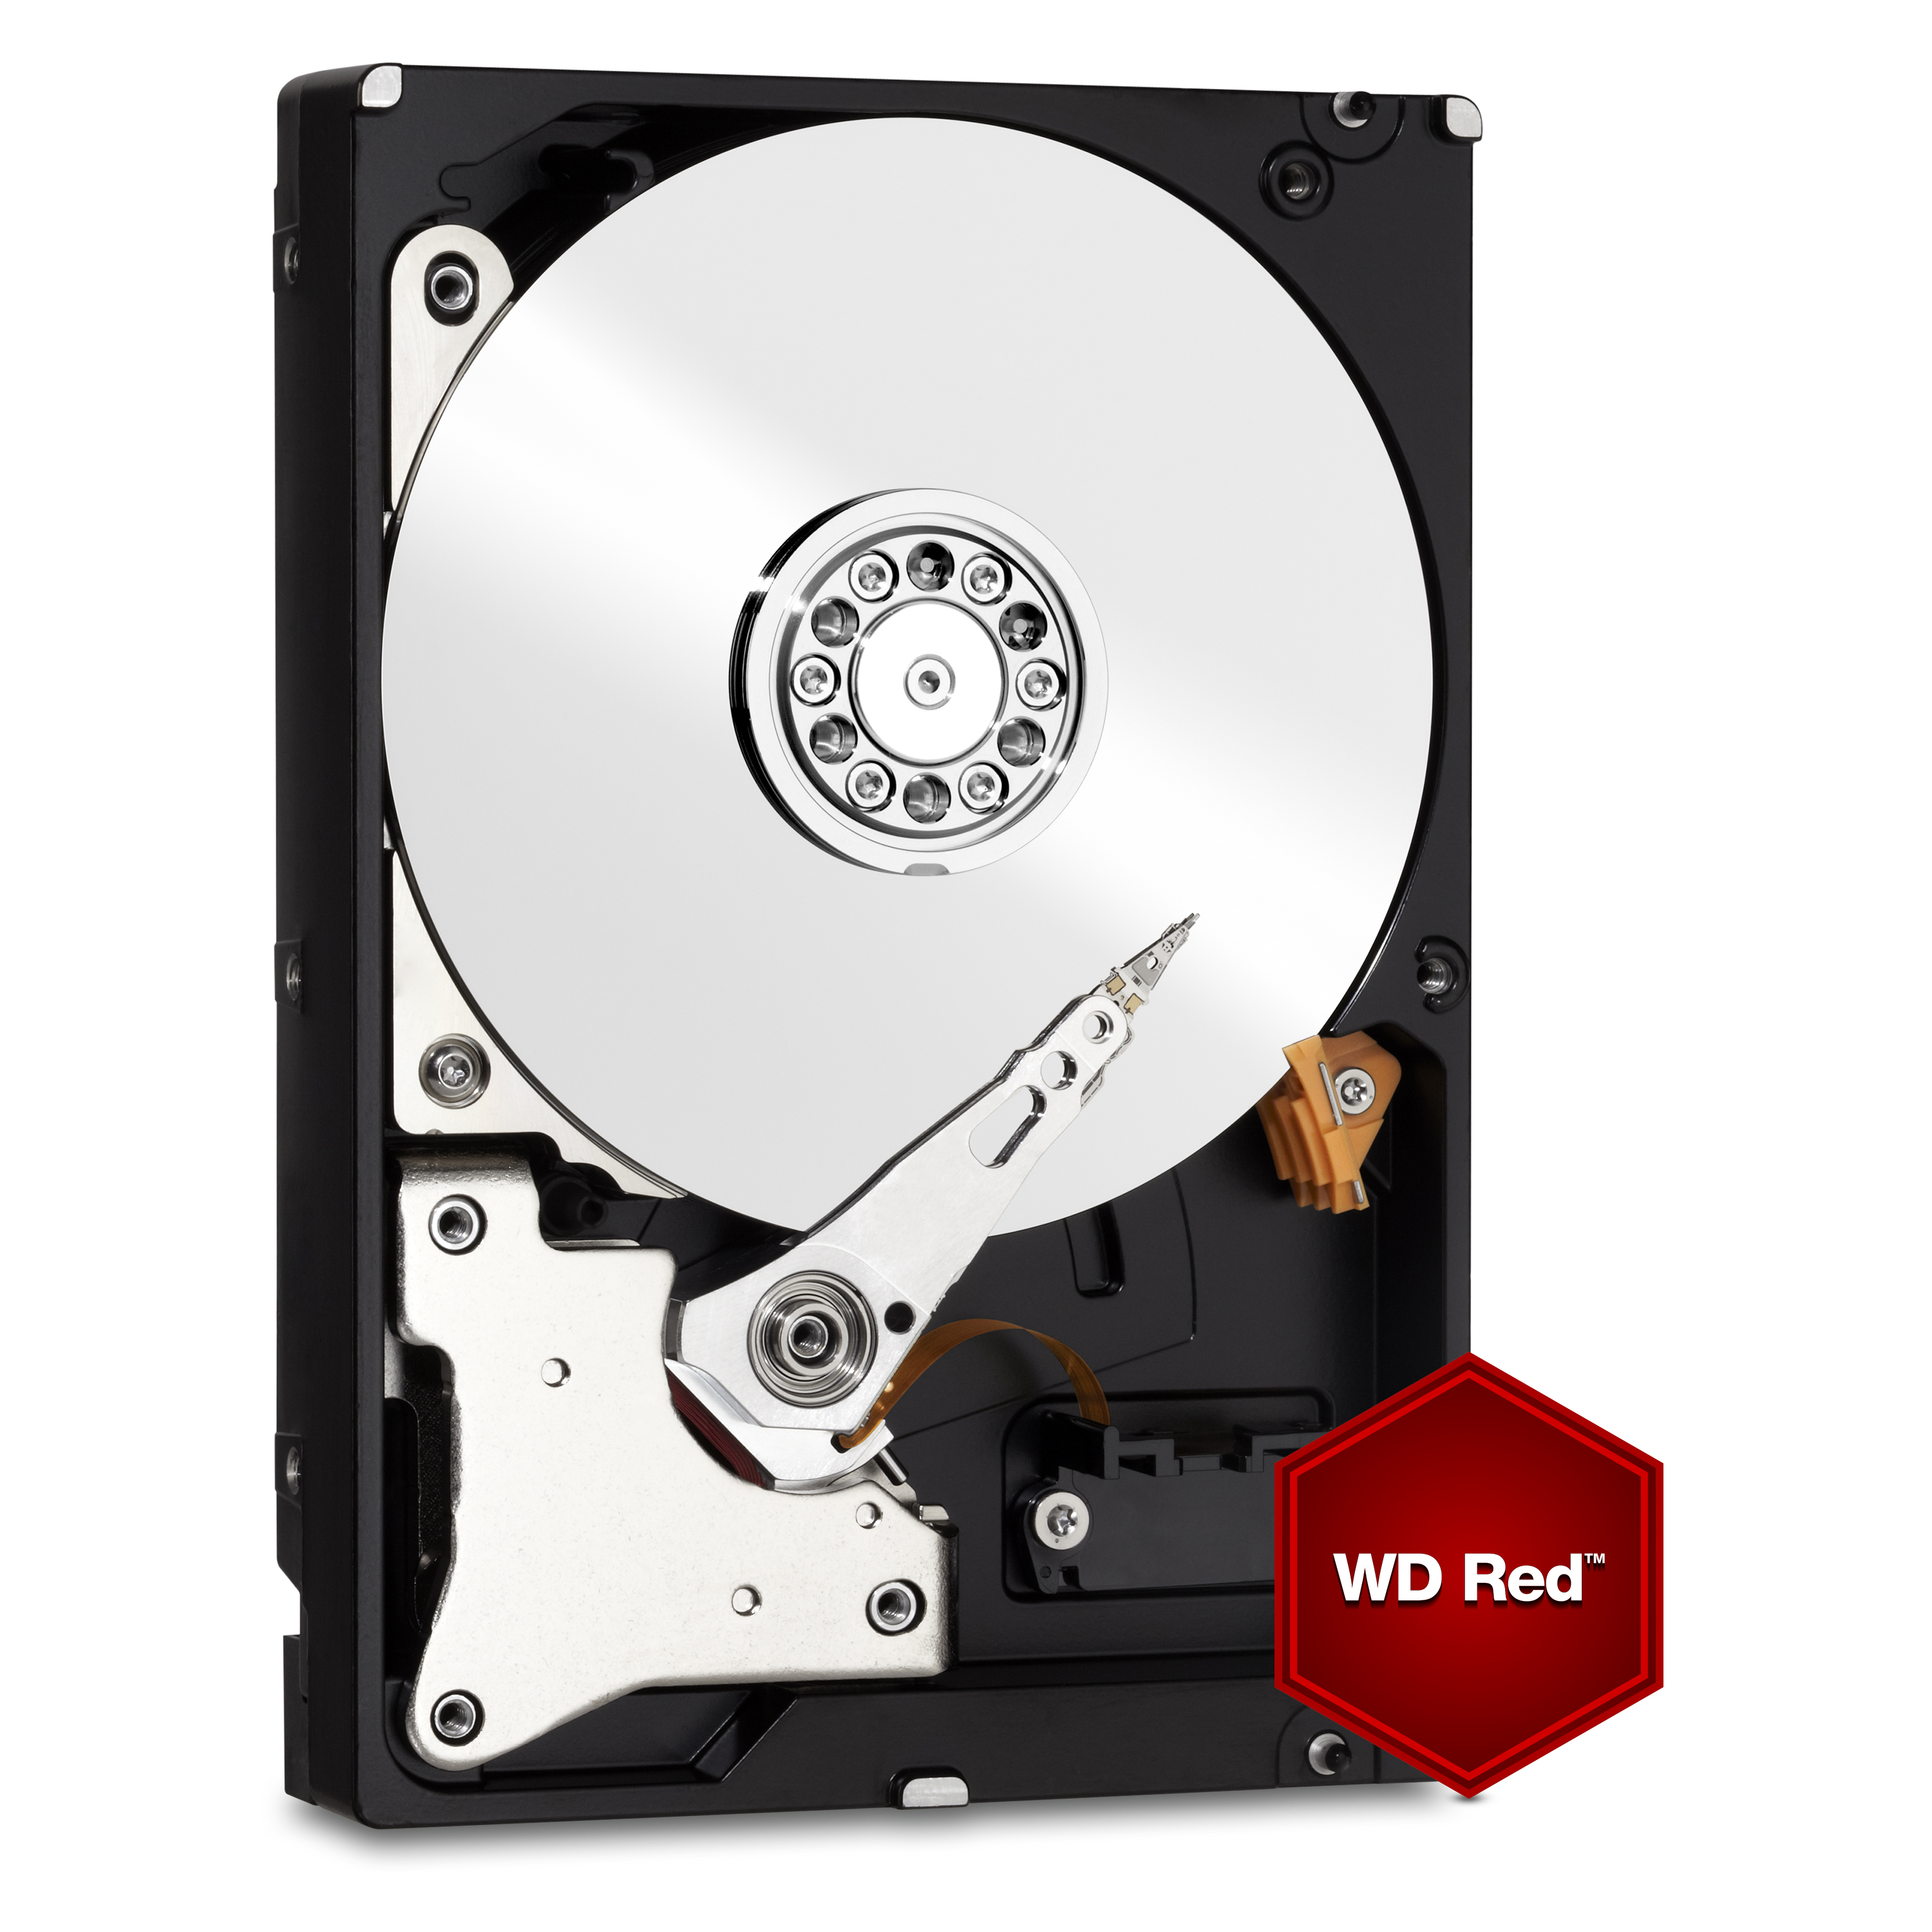 WD60EFRX